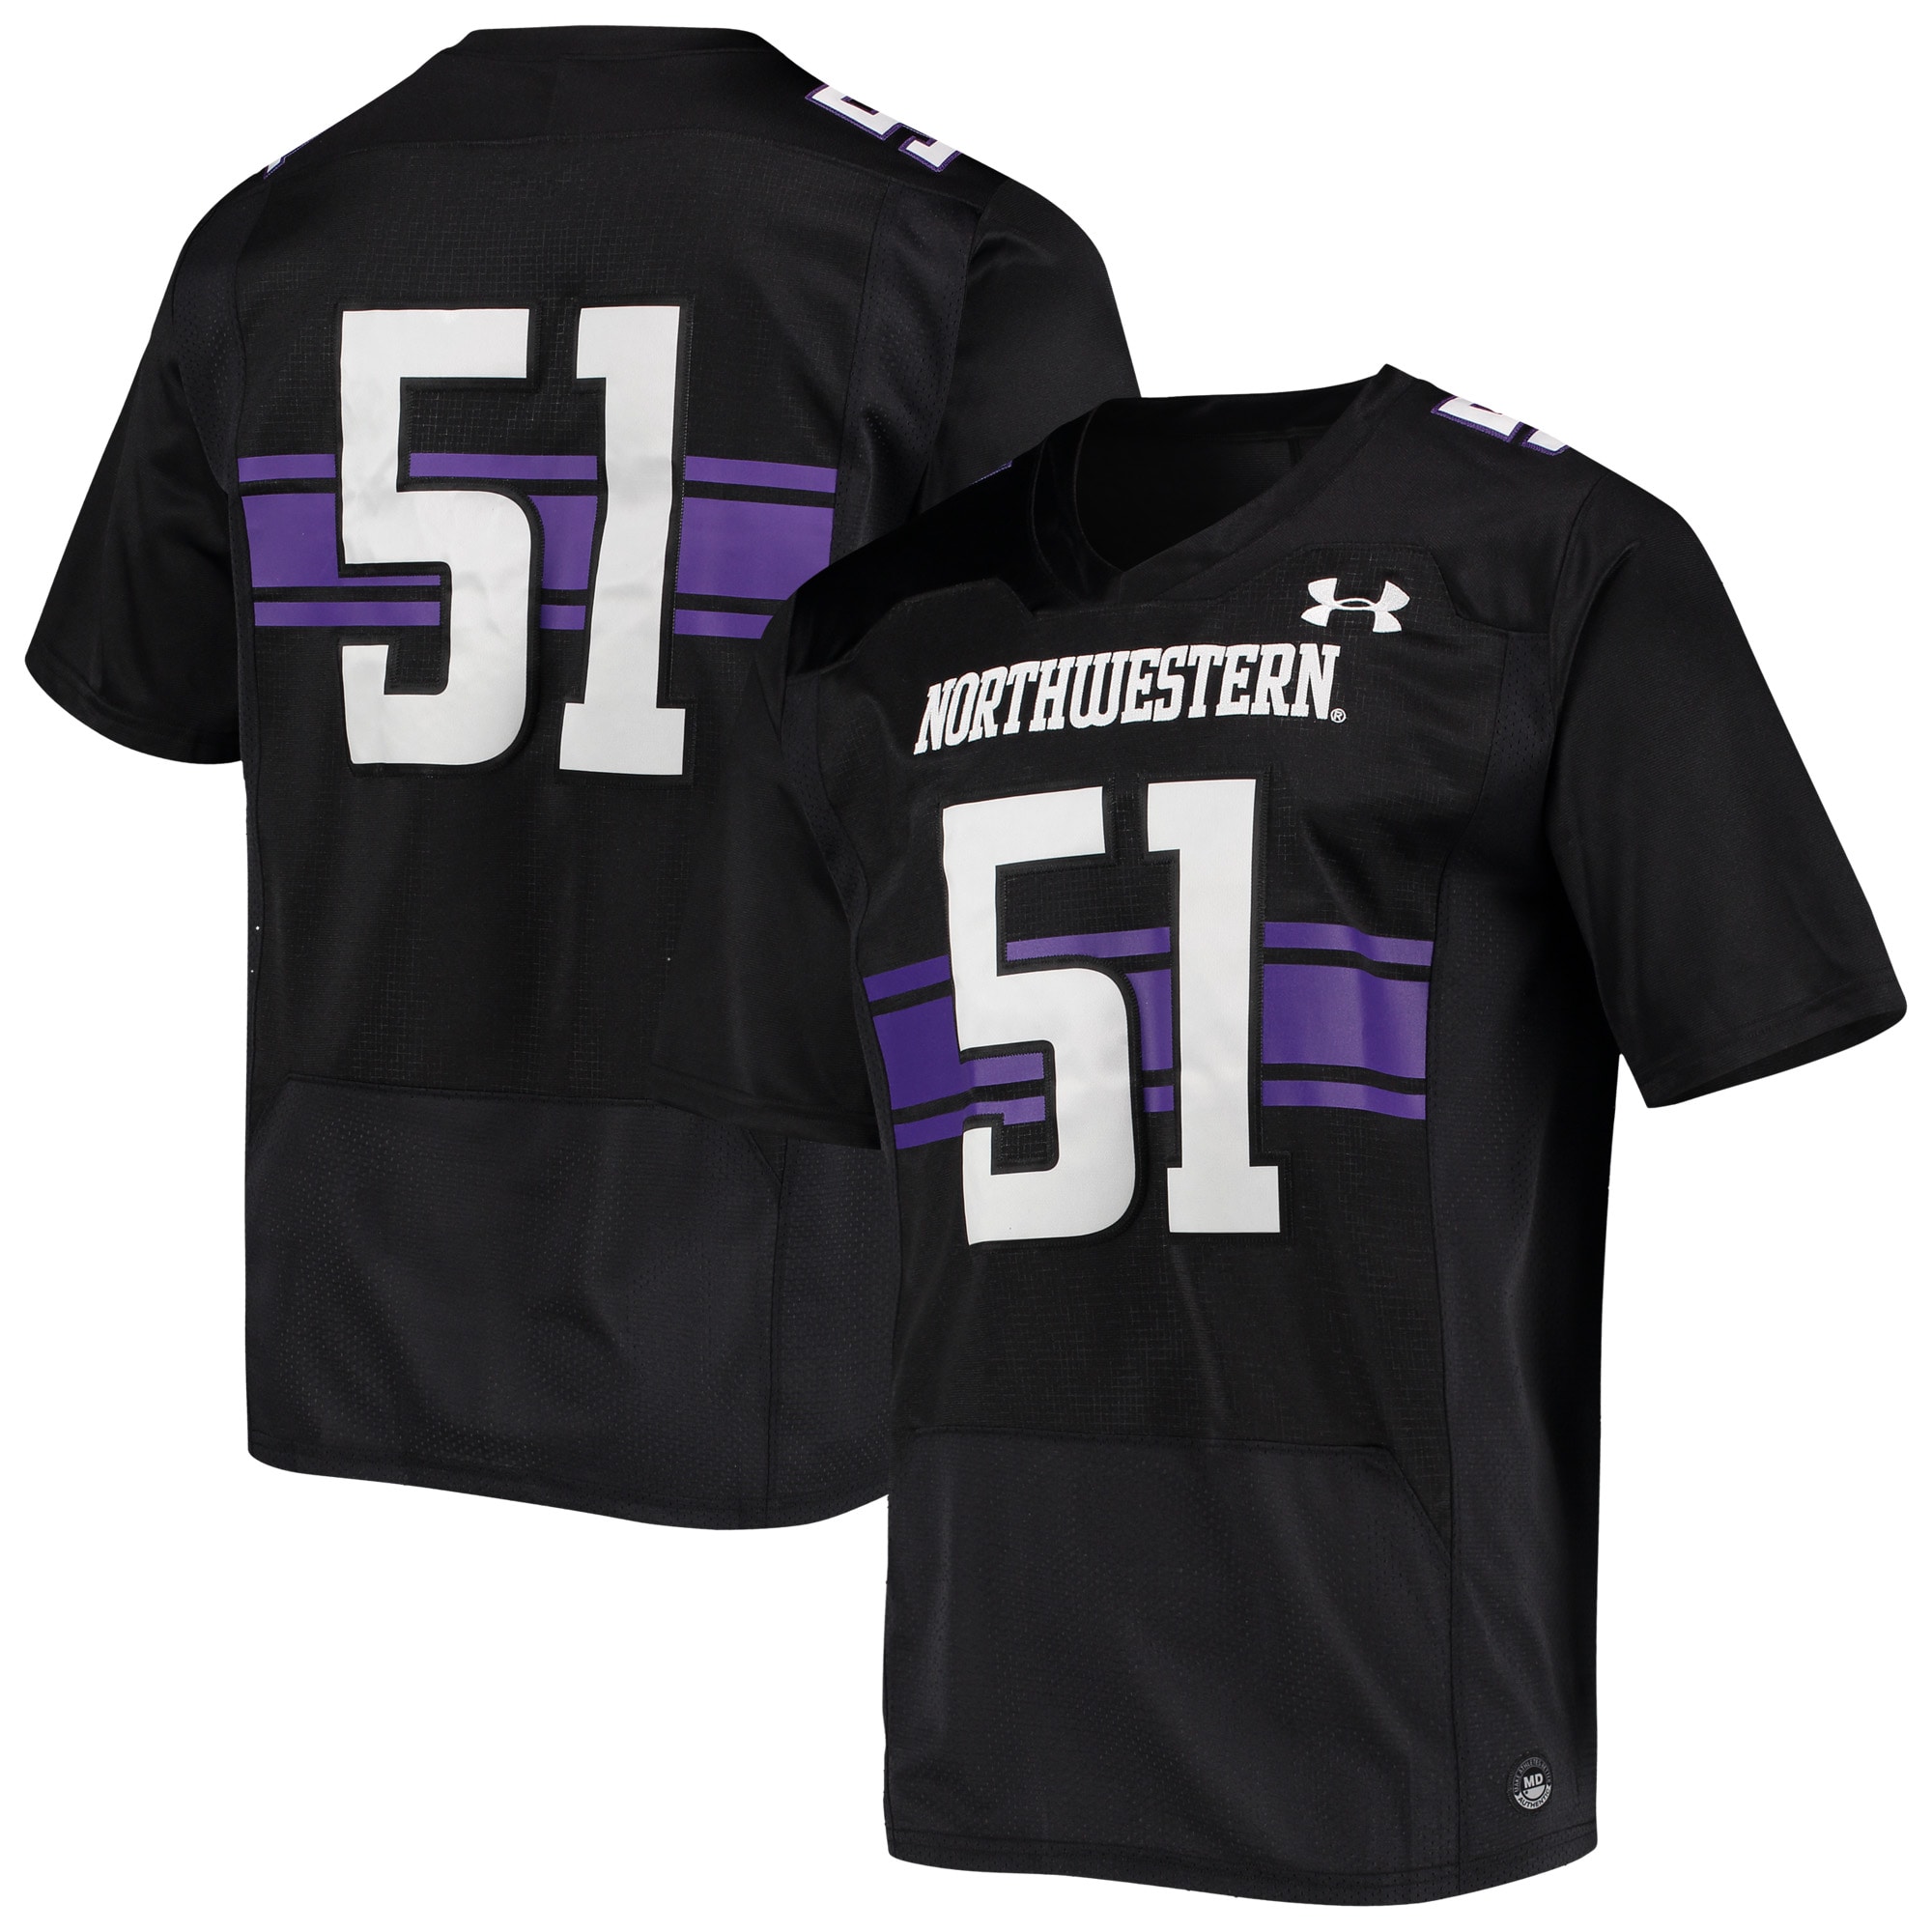 #51 Northwestern Wildcats Under Armour Premiere  Football Shirts Jersey - Black For Youth Women Men